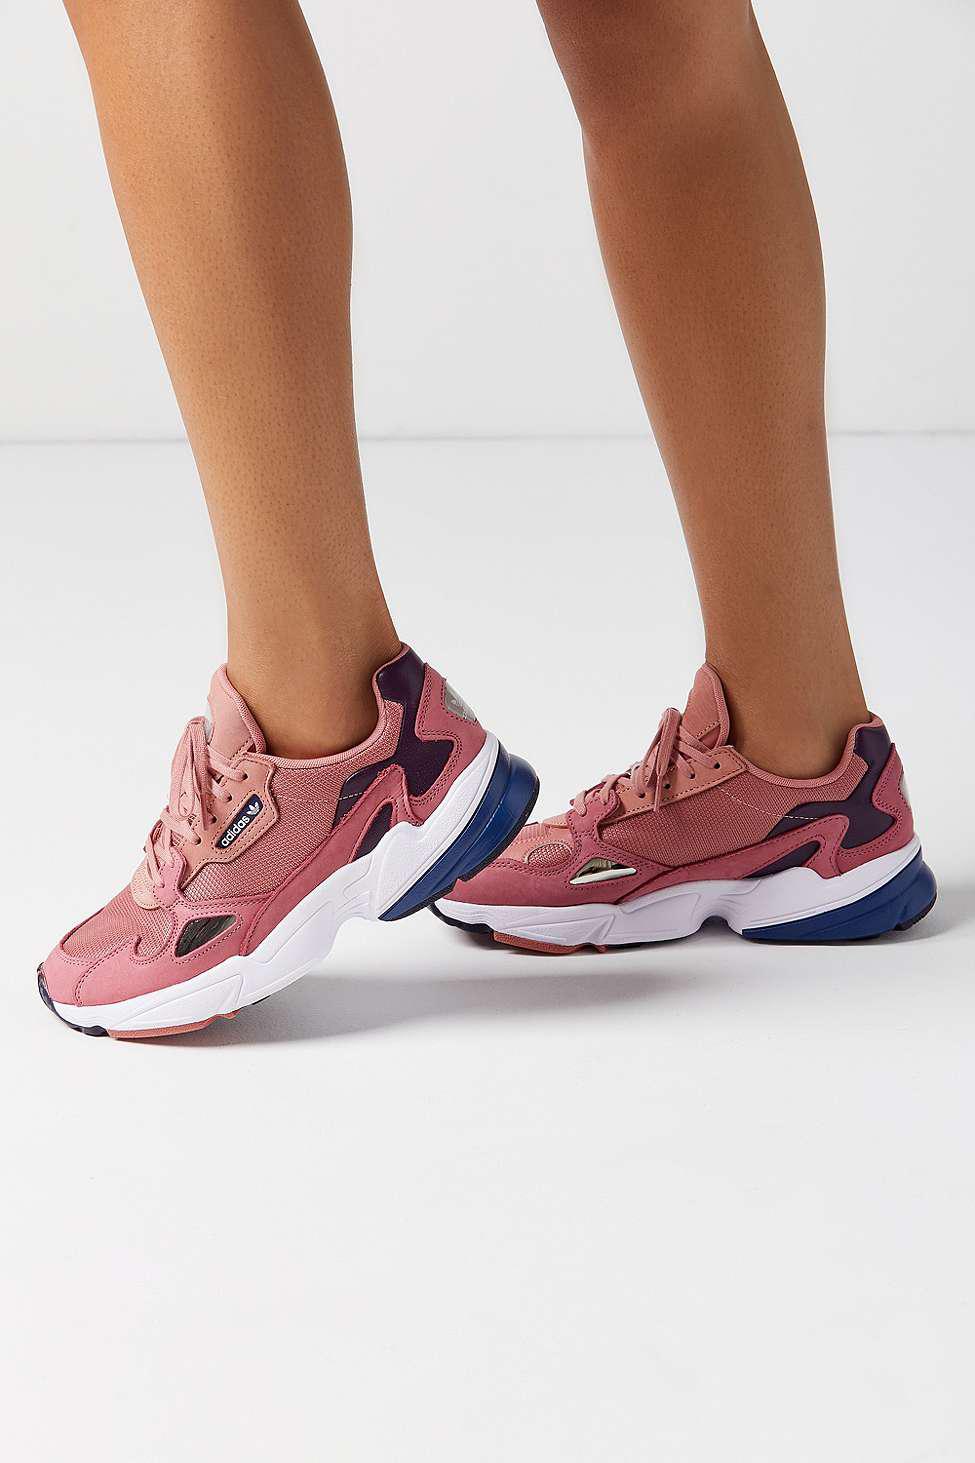 adidas falcon trainers pink dark blue > Factory Store